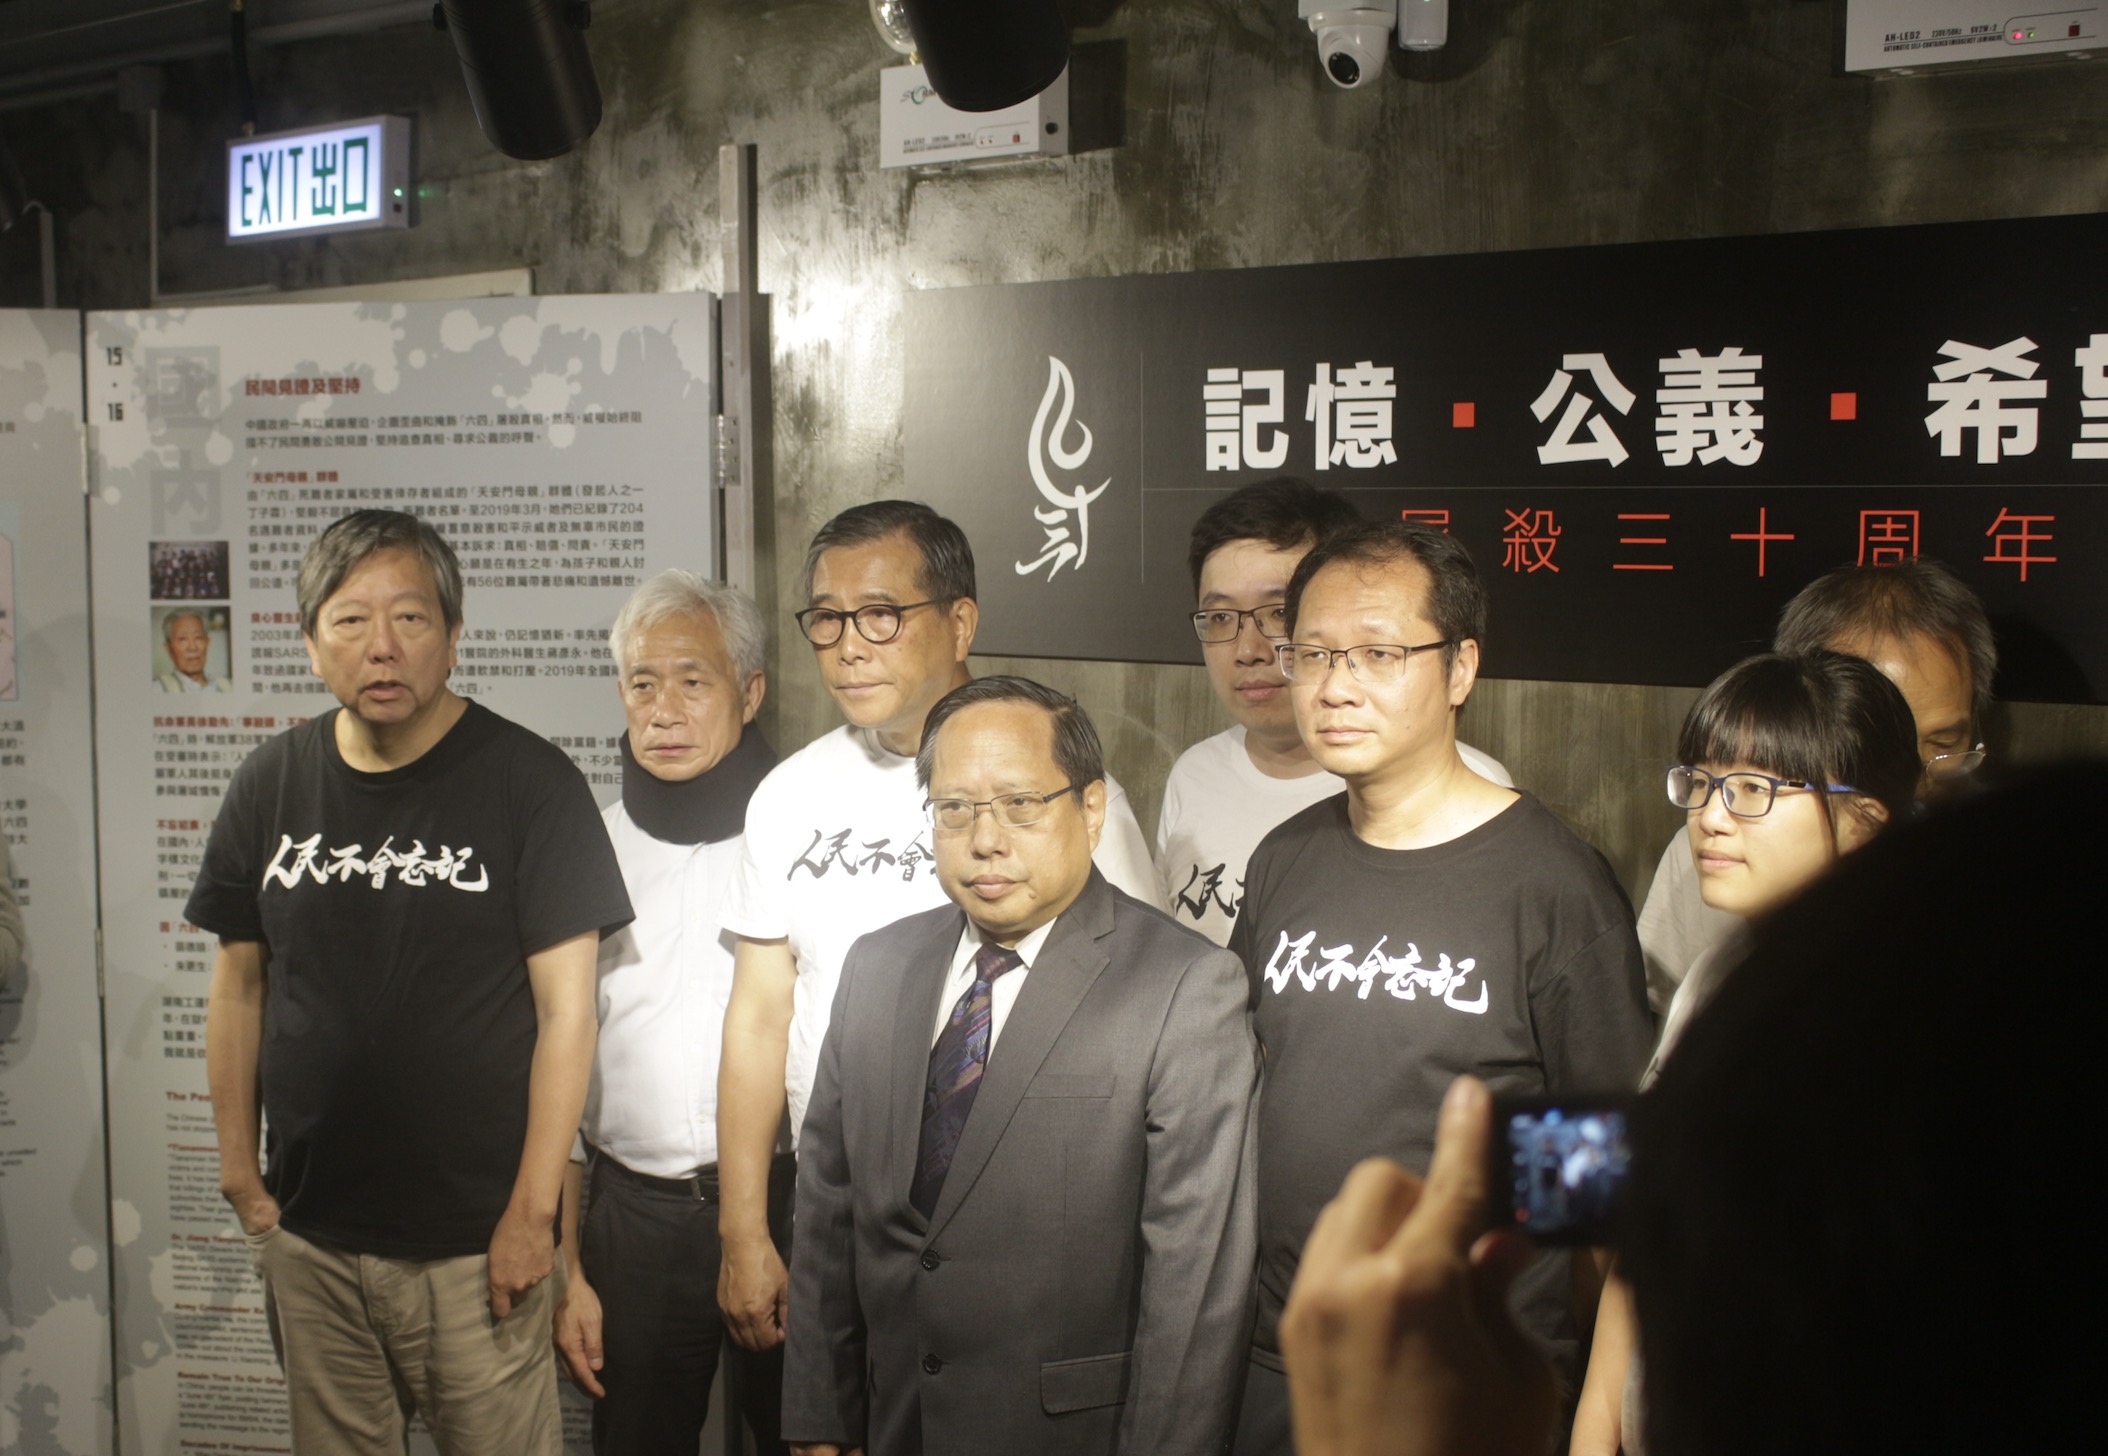 The Hong Kong Alliance in Support of Patriotic Democratic Movements in China shortly before addressing reporters at the reopening of the June 4 Museum. Photo by Vicky Wong